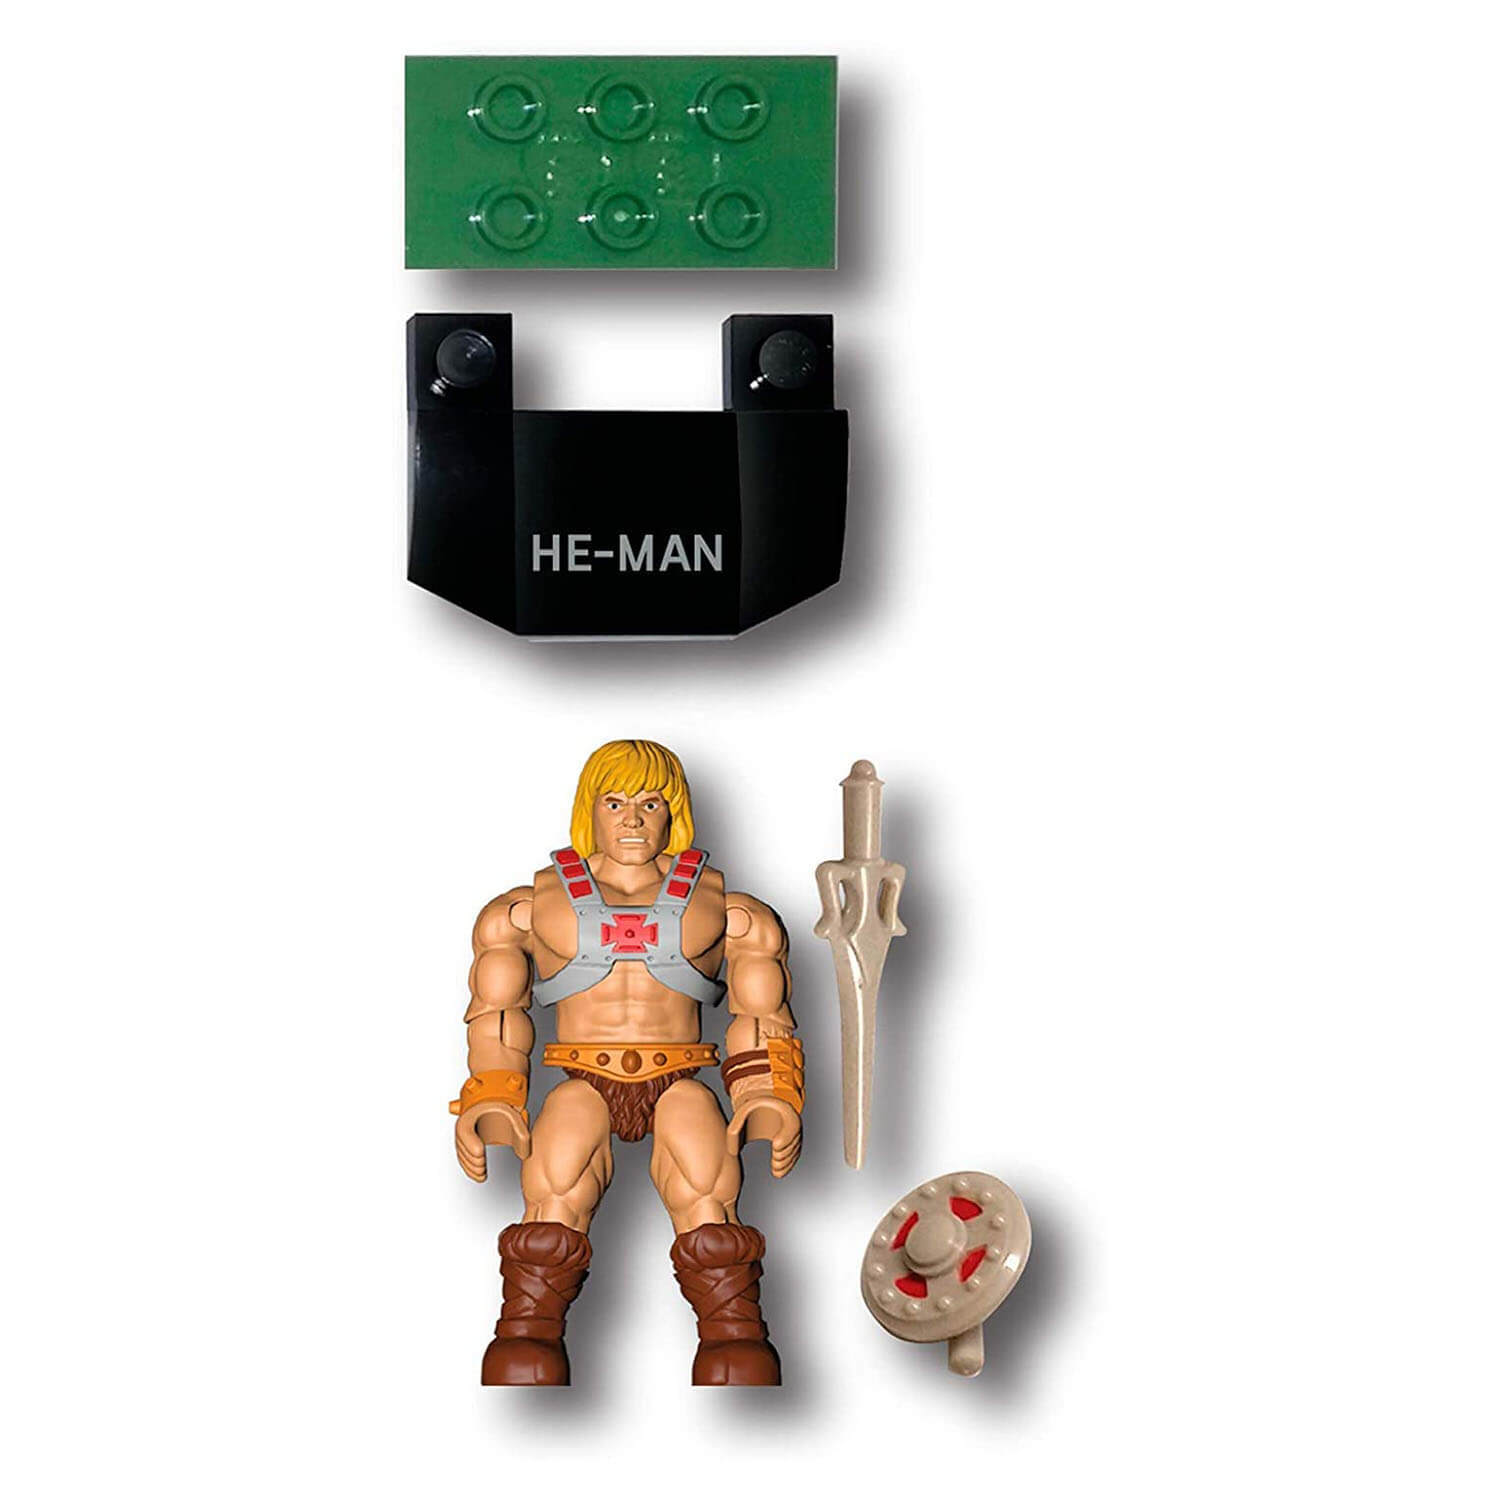 Front view of the he-man figure.